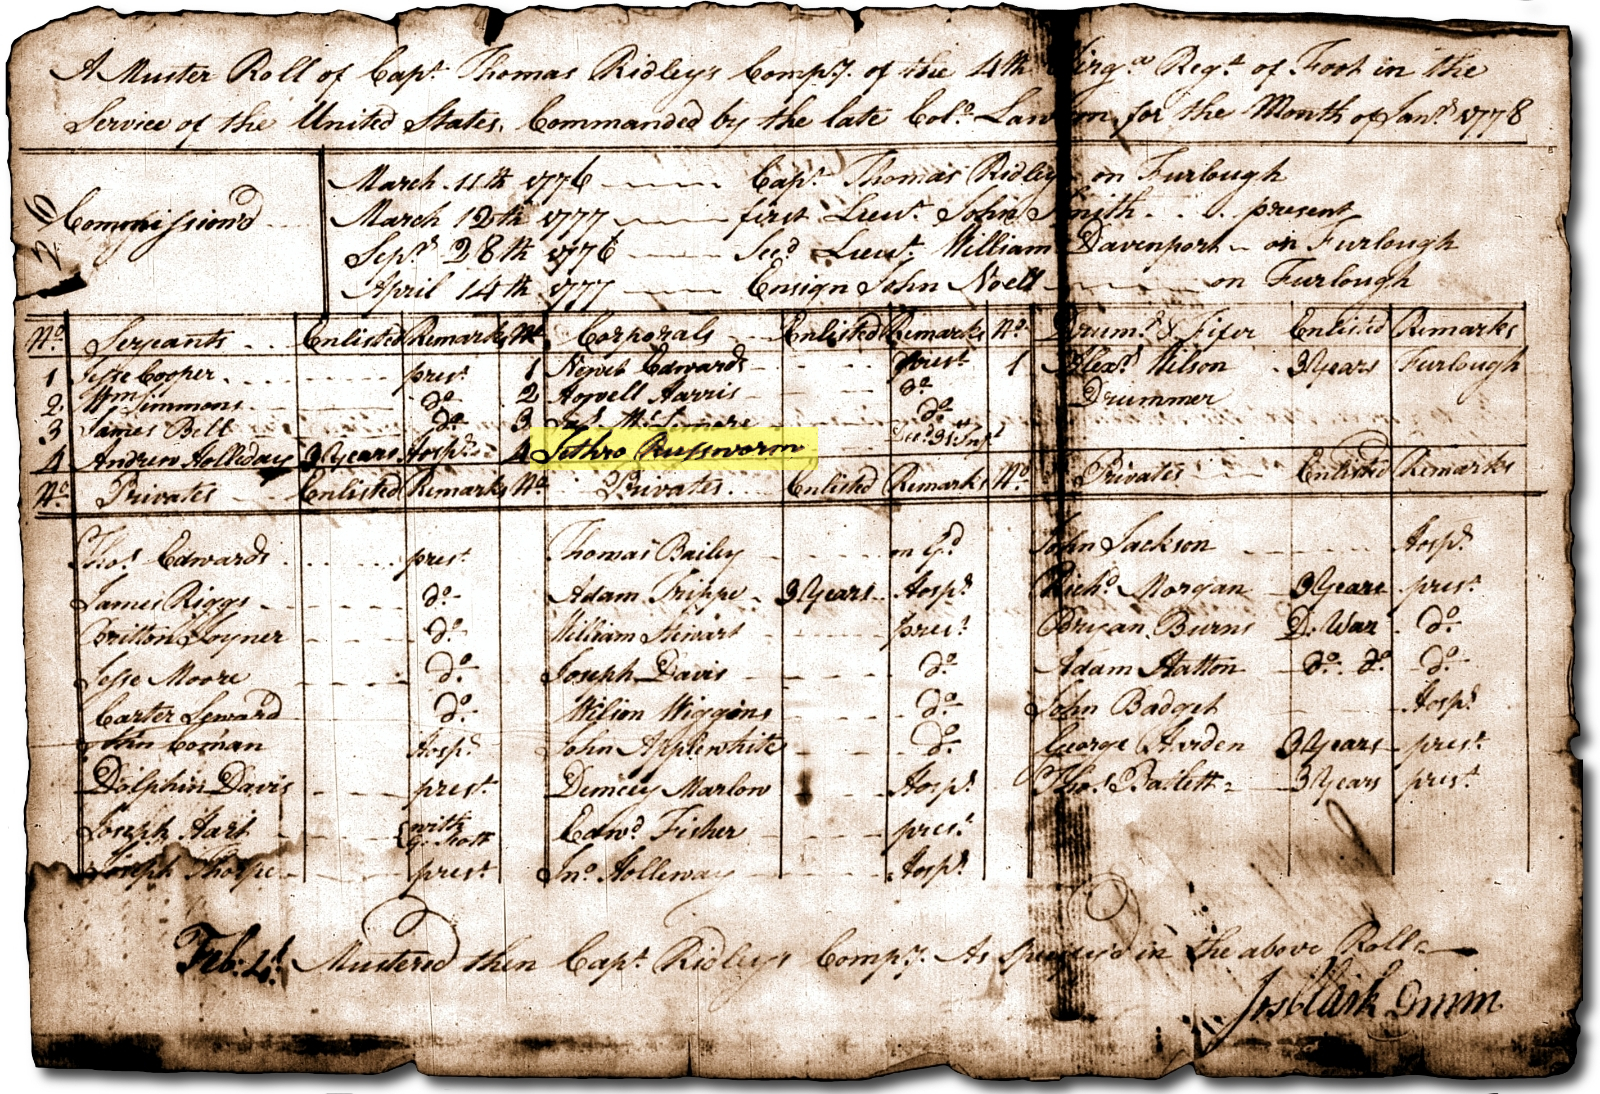 Jethro Russwurm appears on a military record 